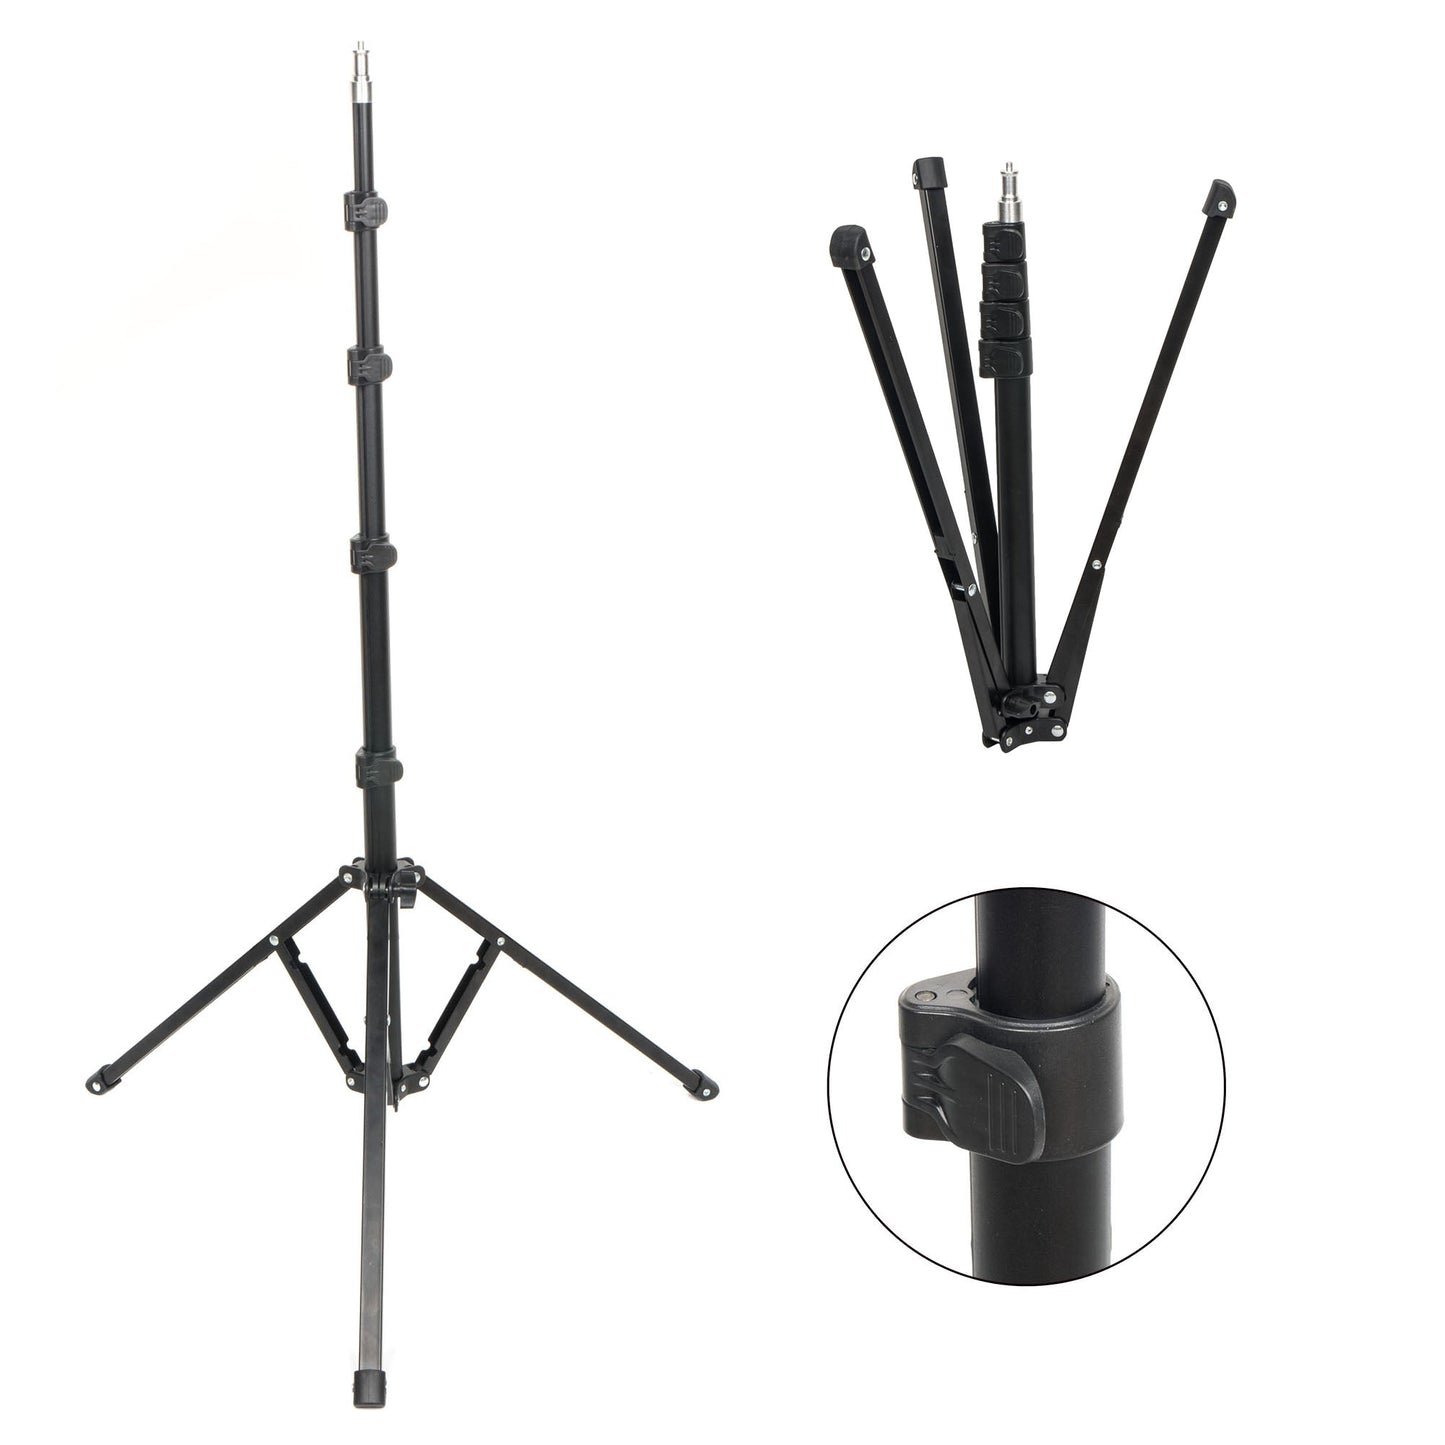 CAME-TV 4X Quick Set Up Compact and Portable Reverse Folding Light Stand for Traveling - CAME-TV